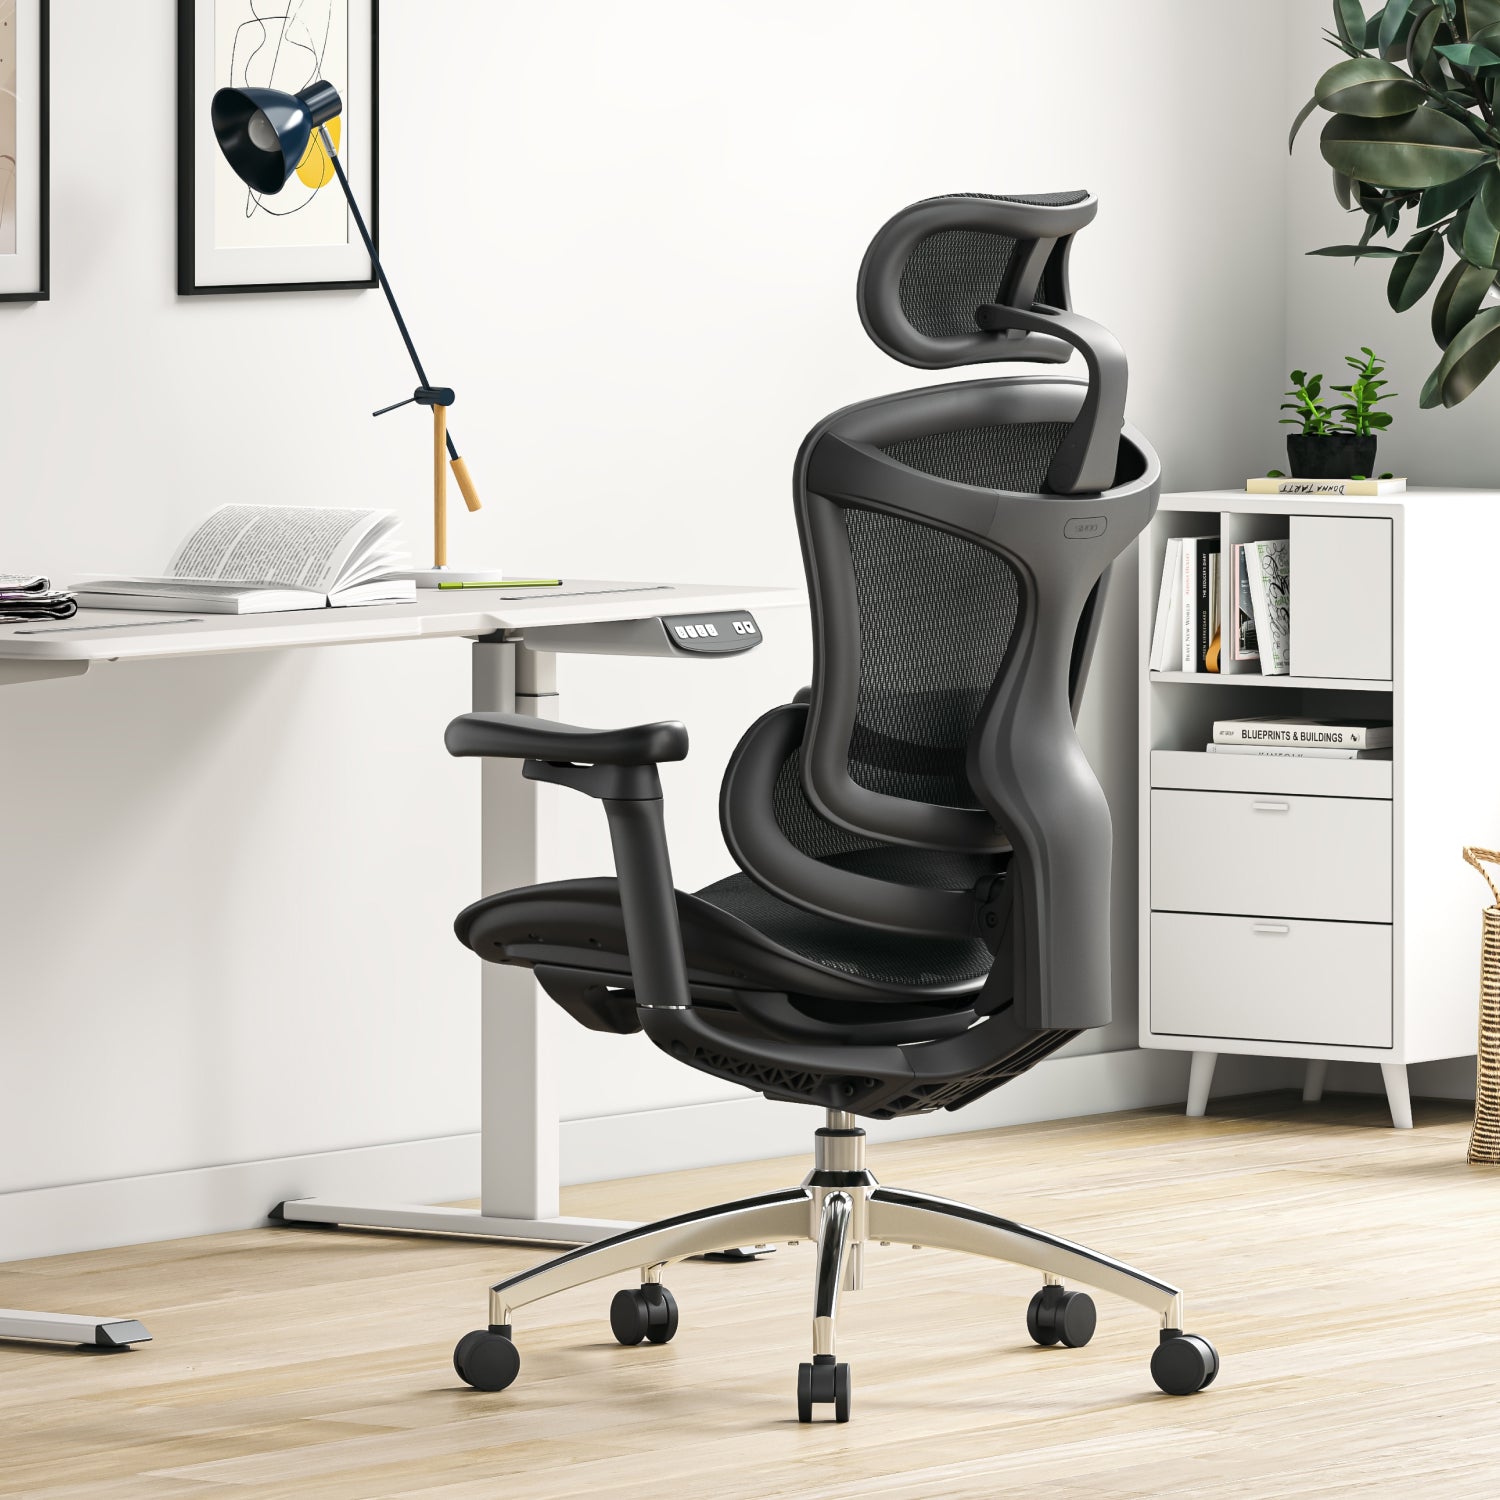 The Ultimate Guide to Clean and Maintain Your Sihoo M57 Office Chair